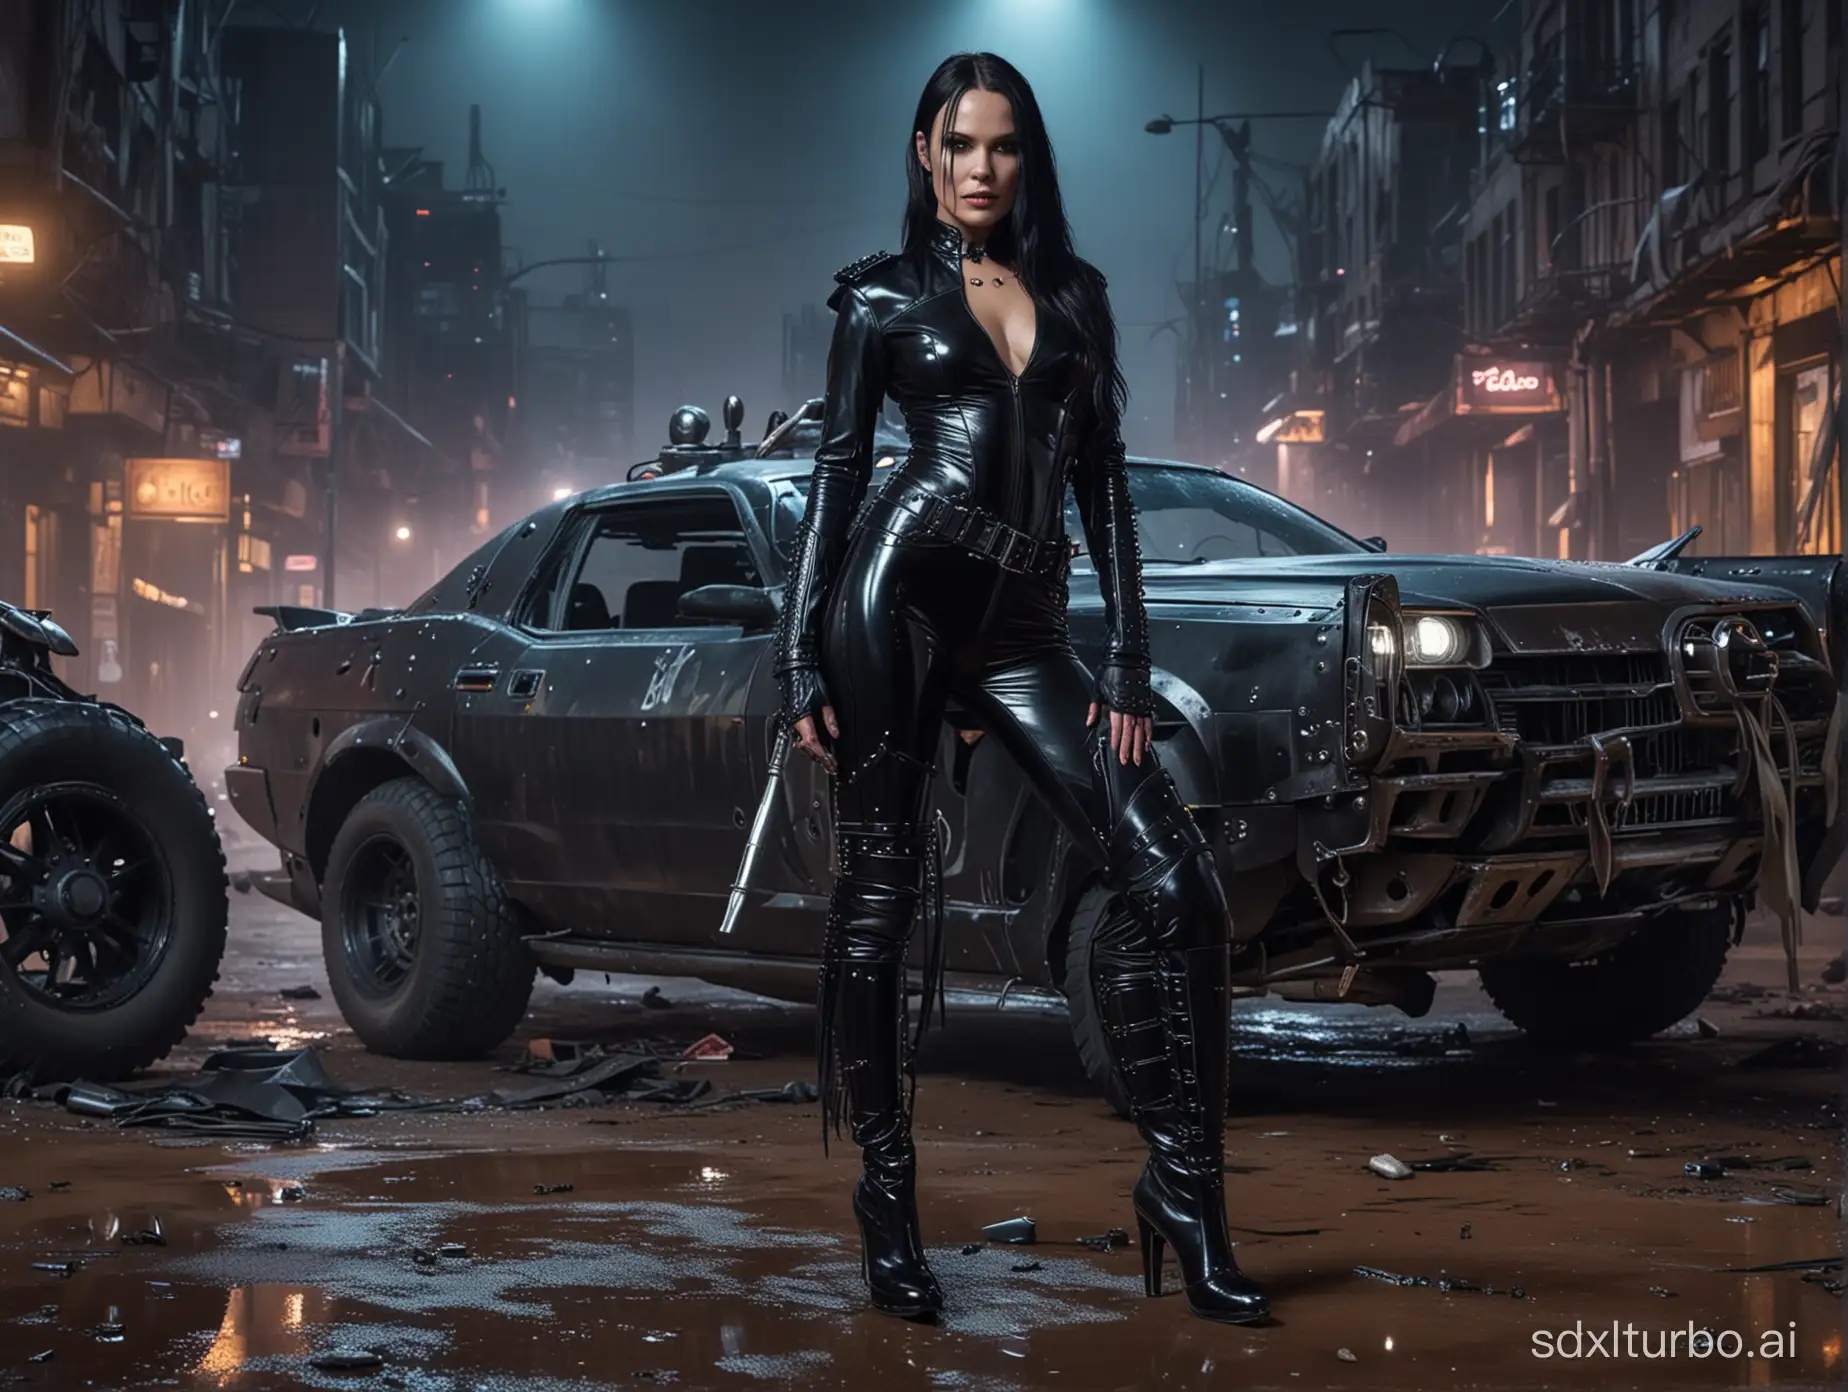 Cyberpunk-Police-Woman-Tarja-Turunen-in-Shiny-PVC-Catsuit-in-Destroyed-City-at-Night